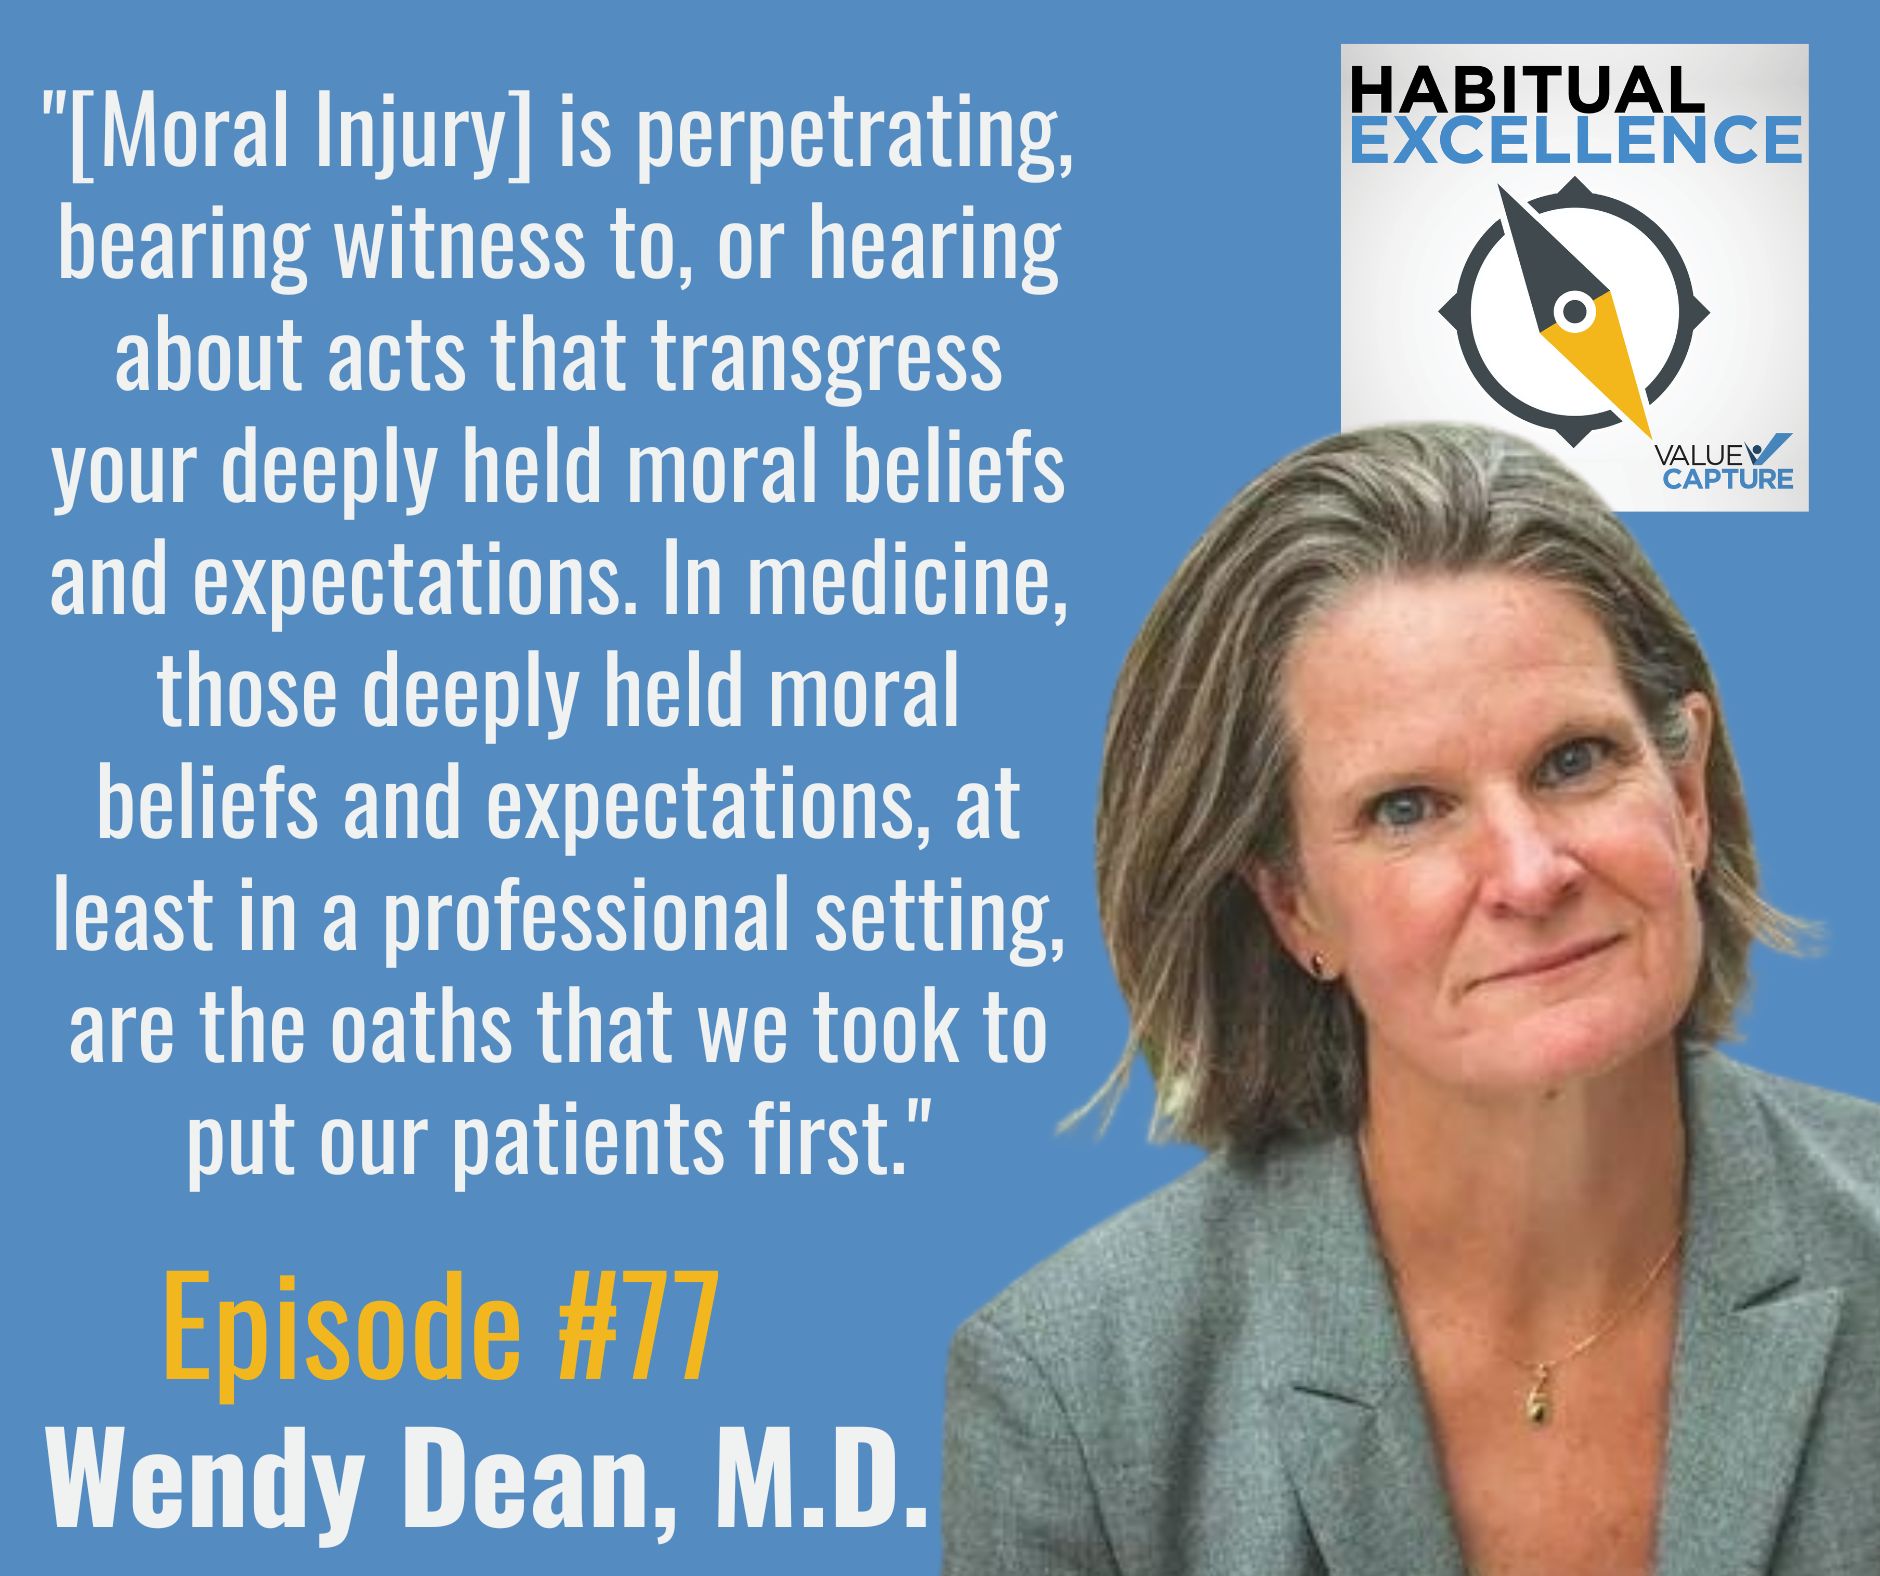 "[Moral Injury] is perpetrating, bearing witness to, or hearing about acts that transgress your deeply held moral beliefs and expectations. In medicine, those deeply held moral beliefs and expectations, at least in a professional setting, are the oaths that we took to put our patients first." Dr. Wendy Dean